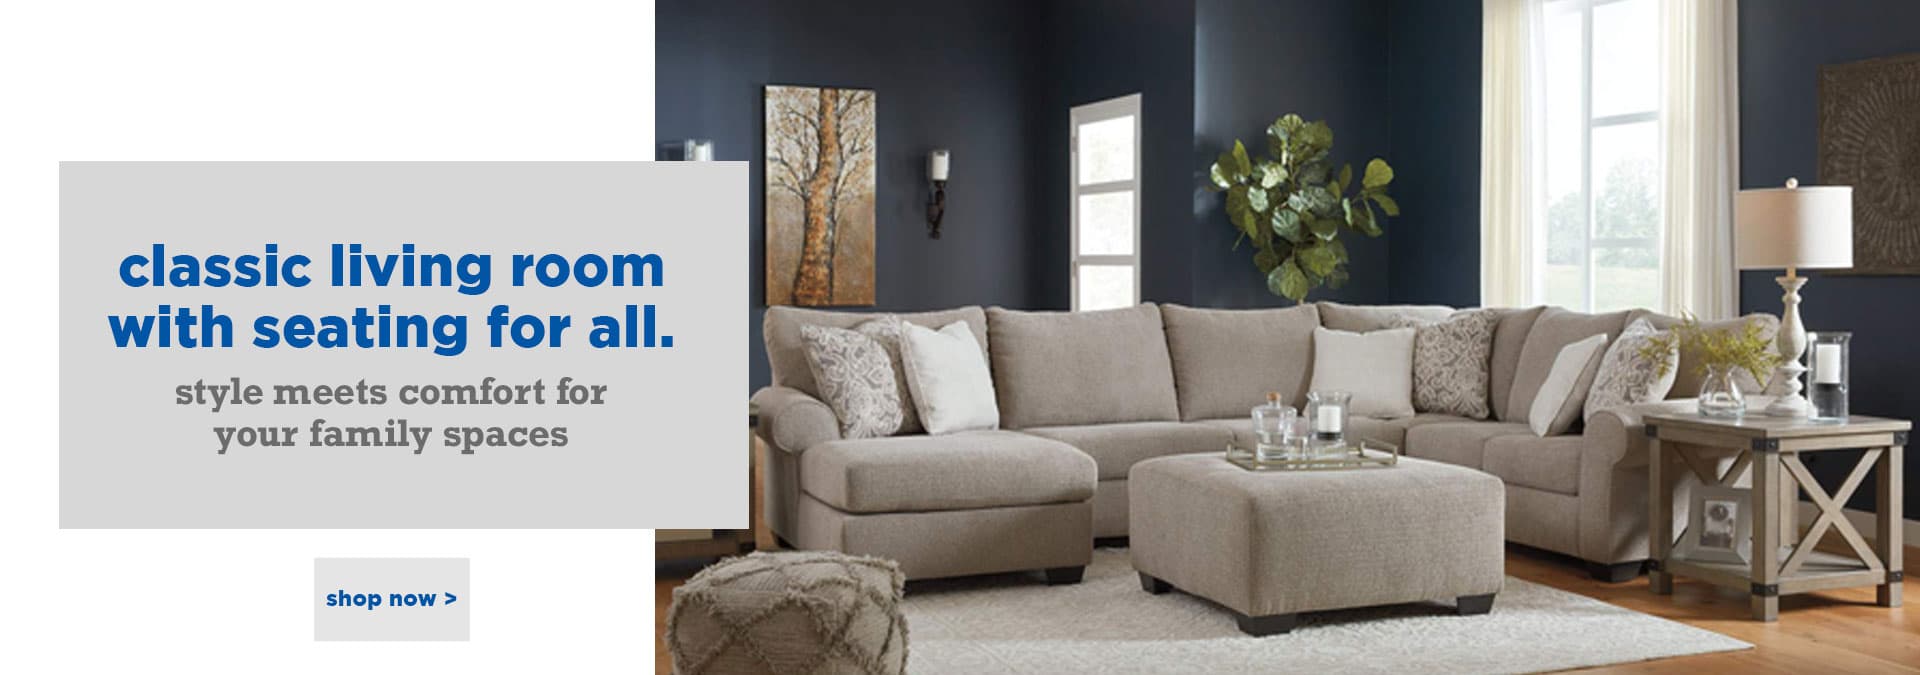 classic living room with seating for all. style meets comfort for your family spaces – shop now